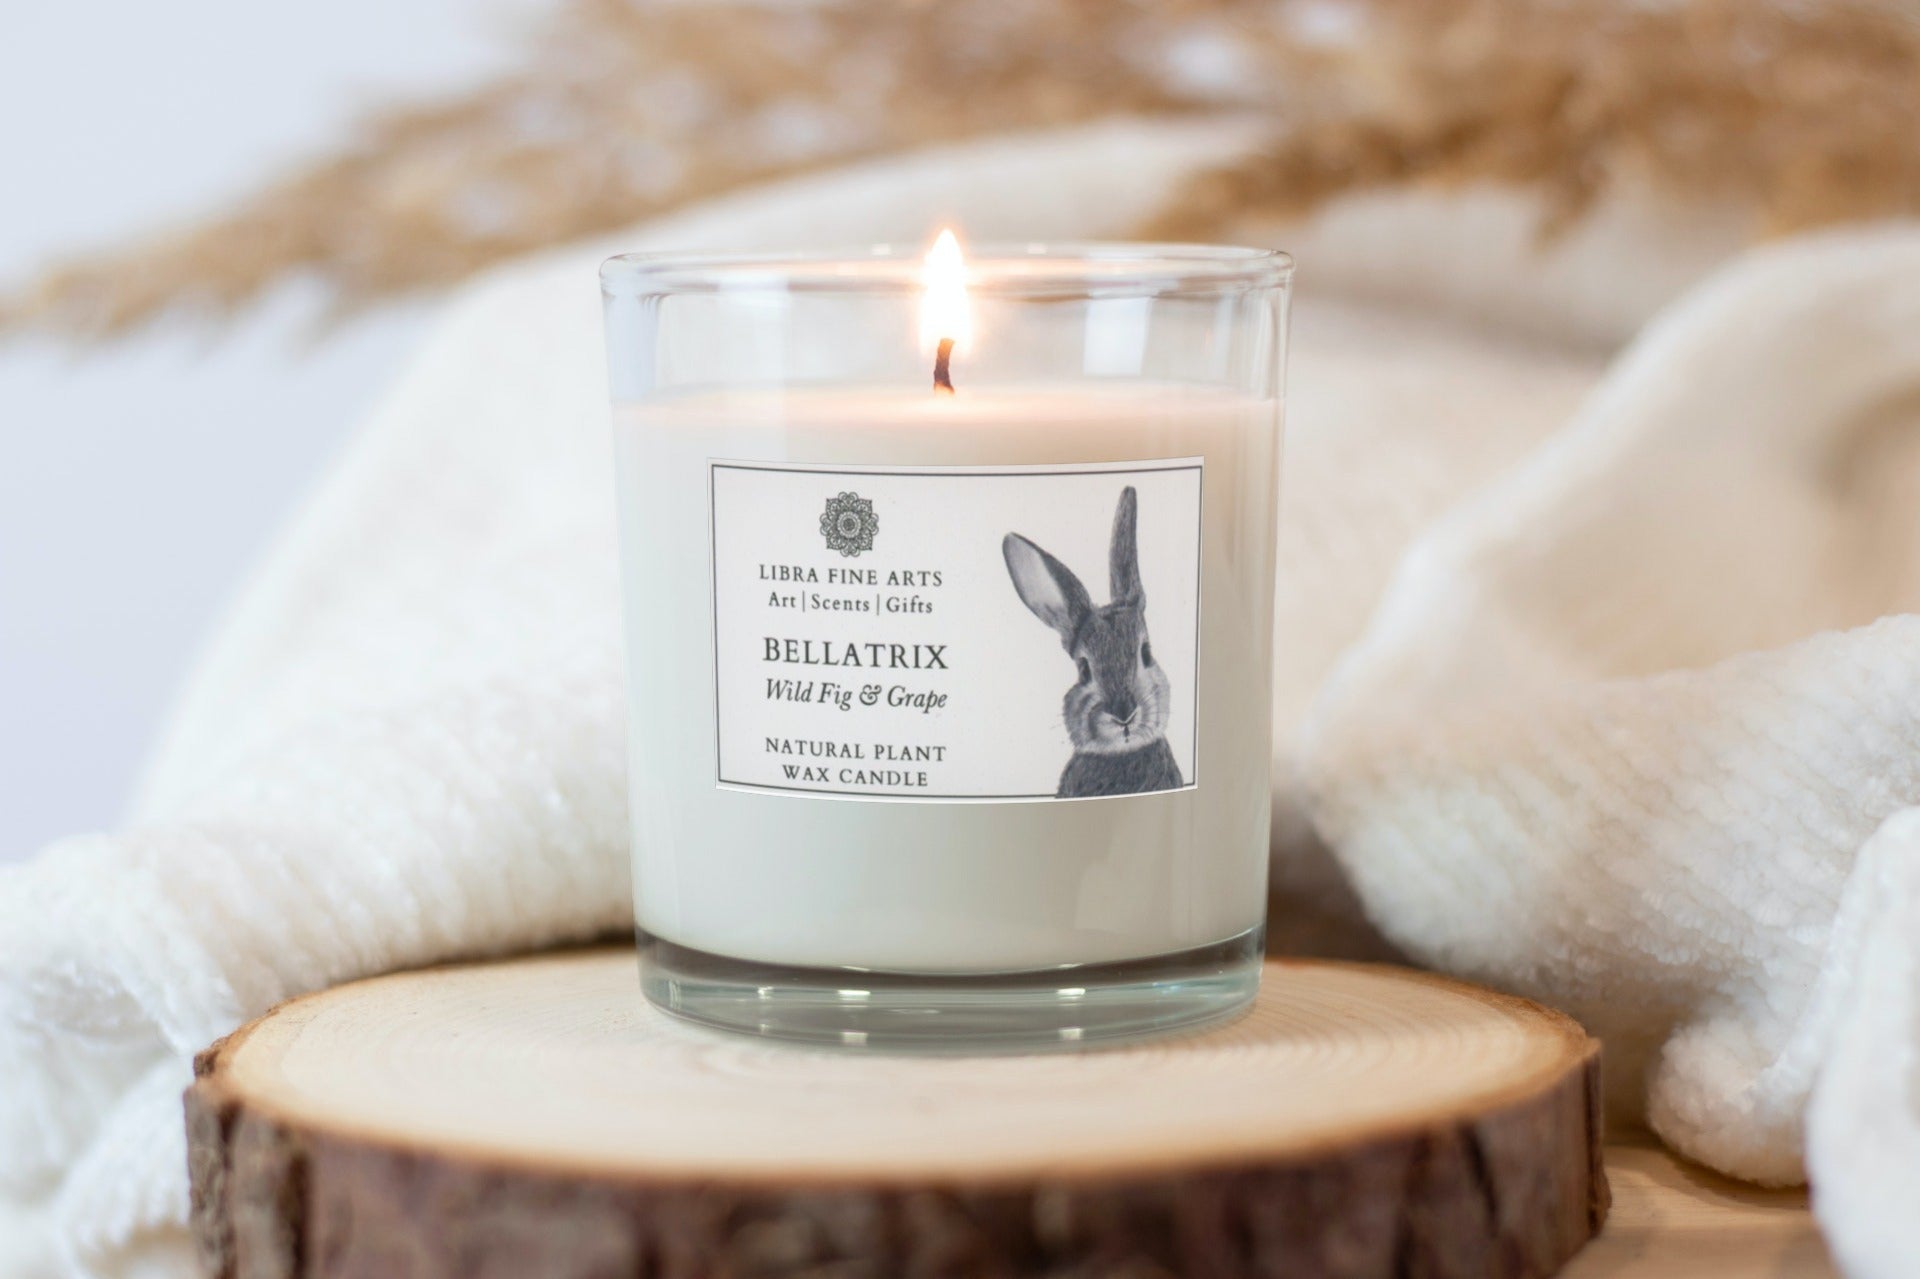 Bunny Luxury Wild Fig and Grape Candle From Libra Fine Arts 